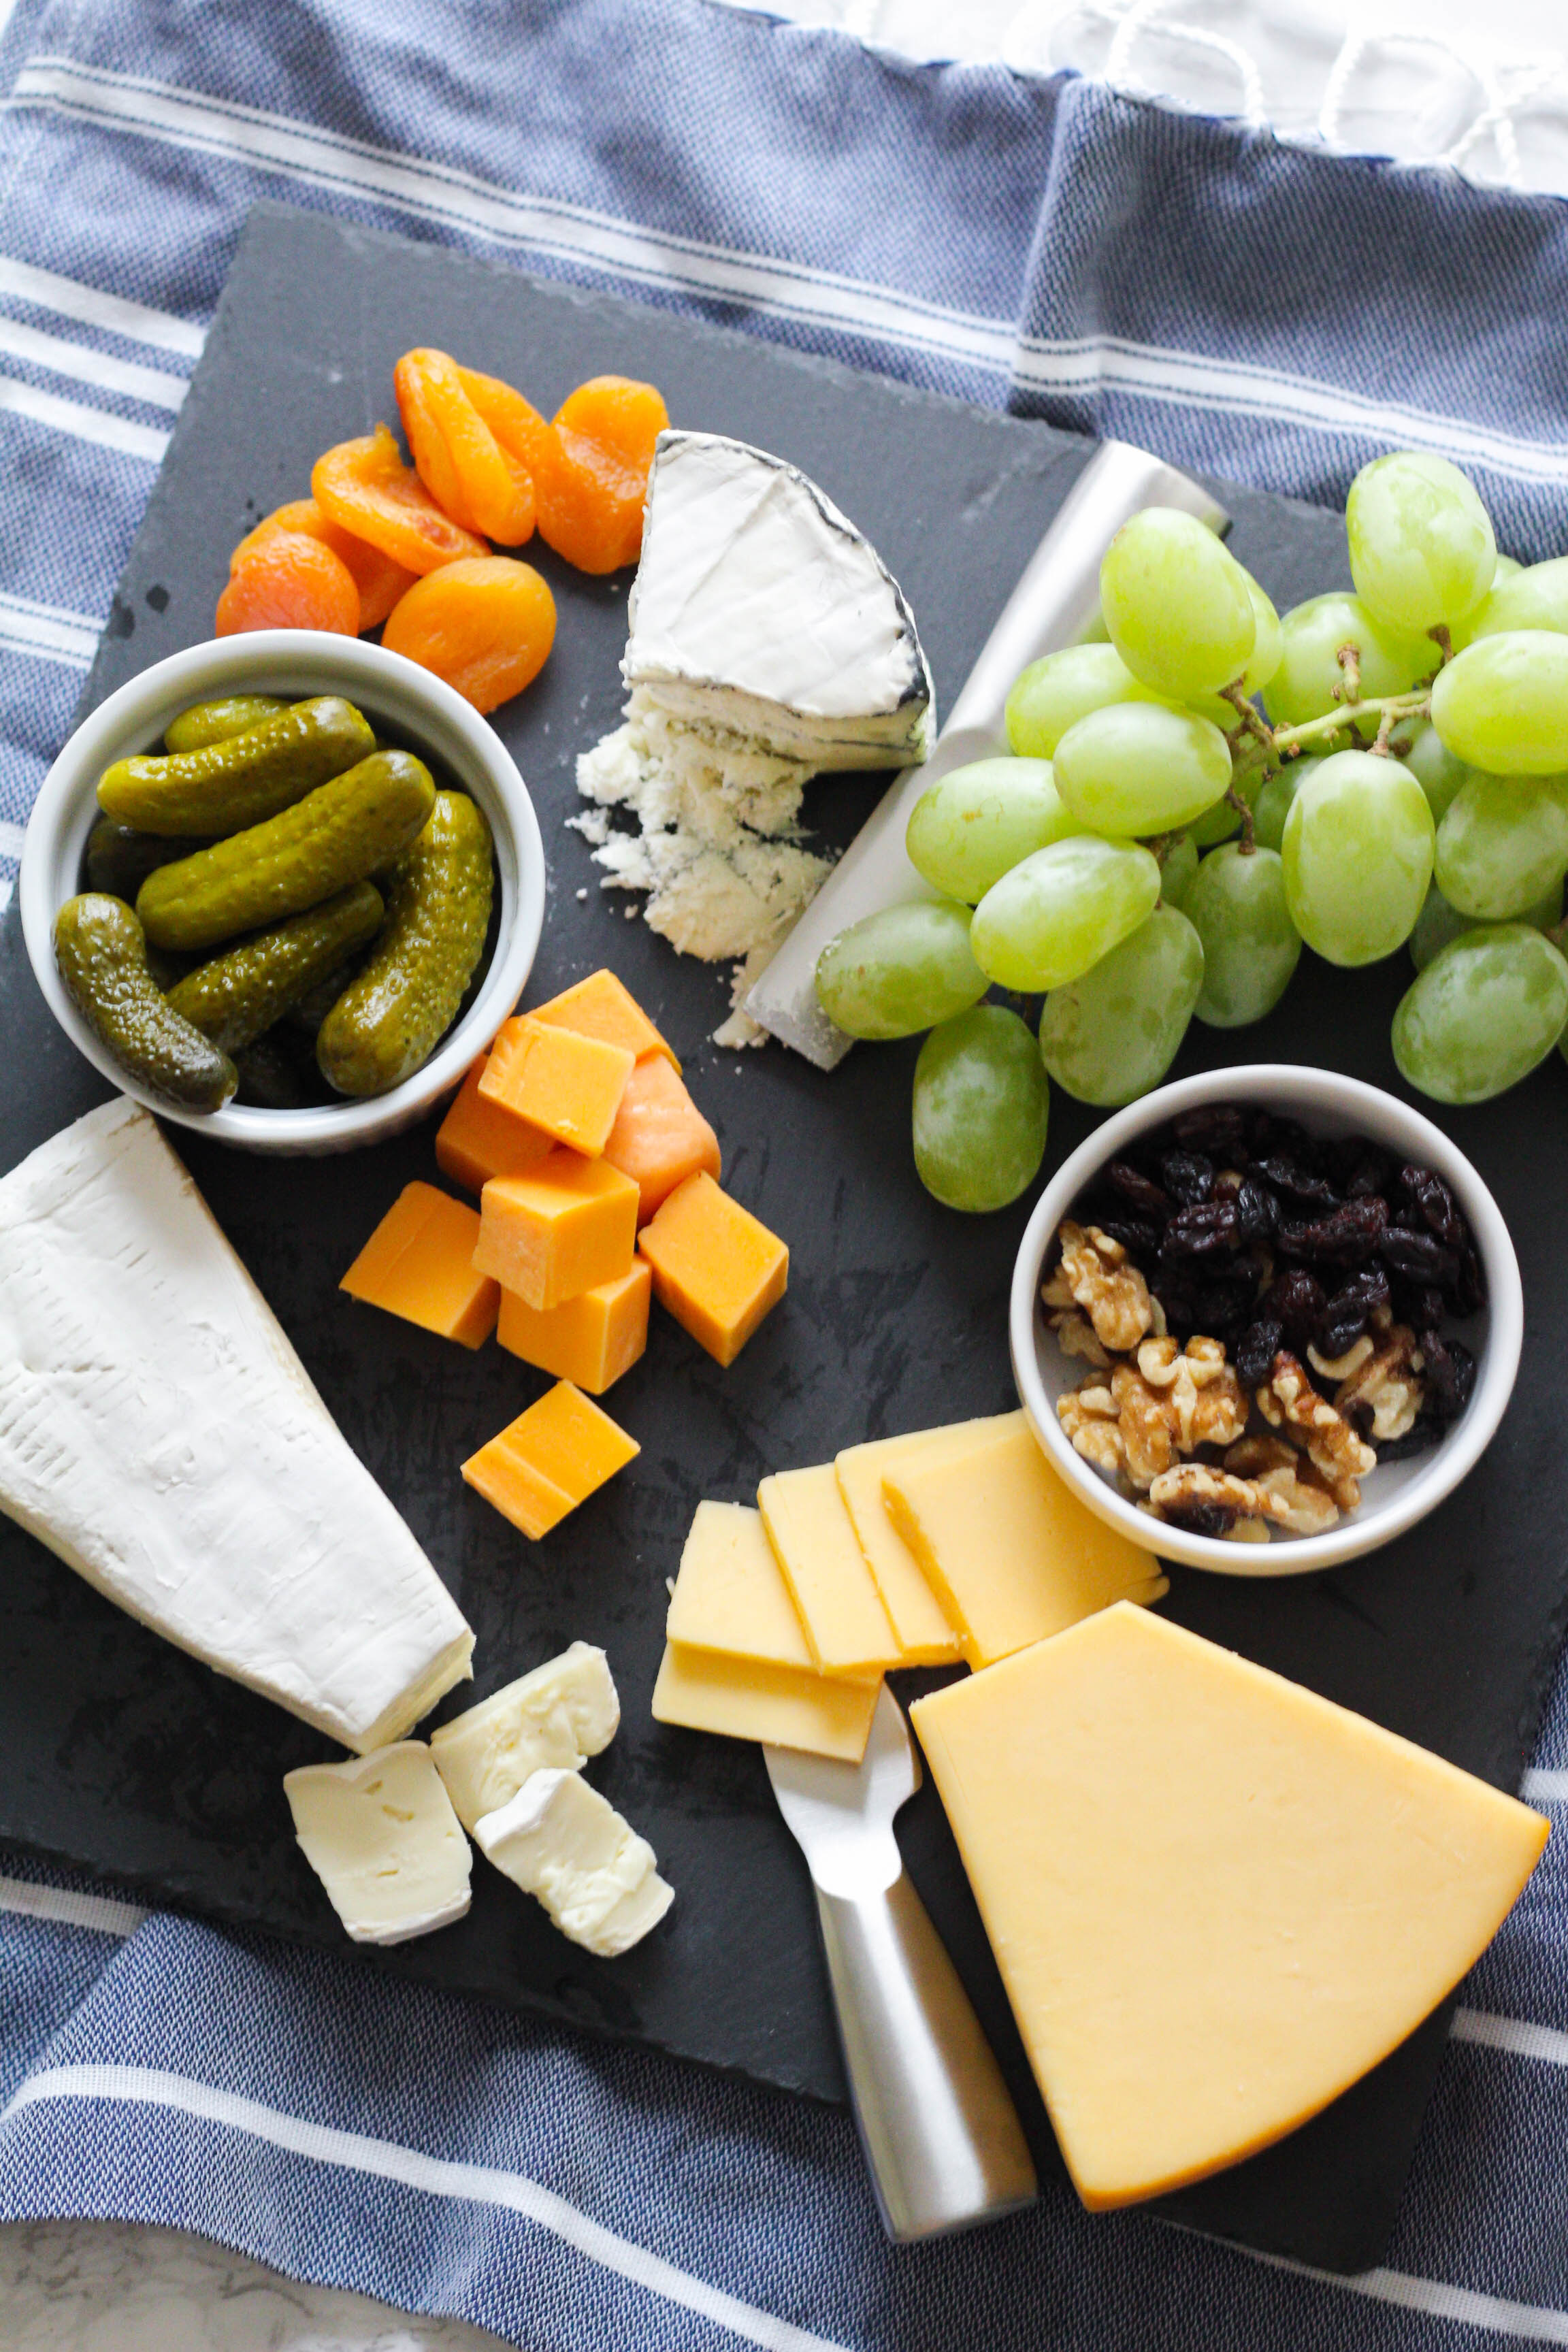 How to Build a Holiday Cheese Board